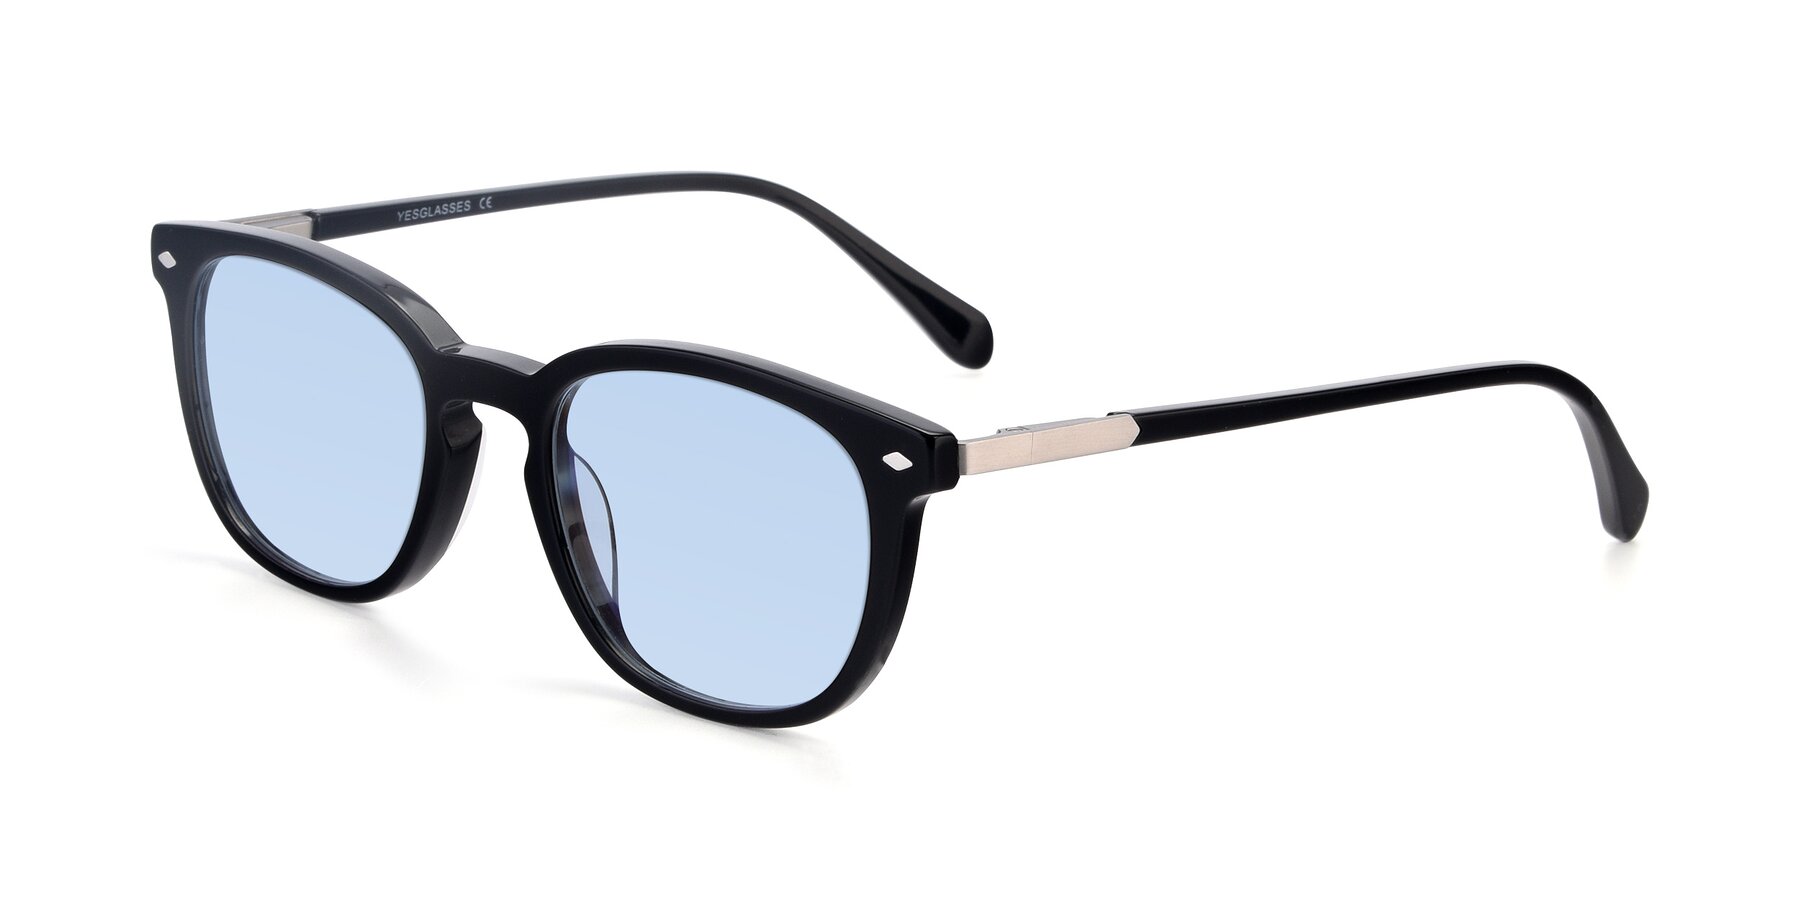 Angle of 17578 in Black with Light Blue Tinted Lenses